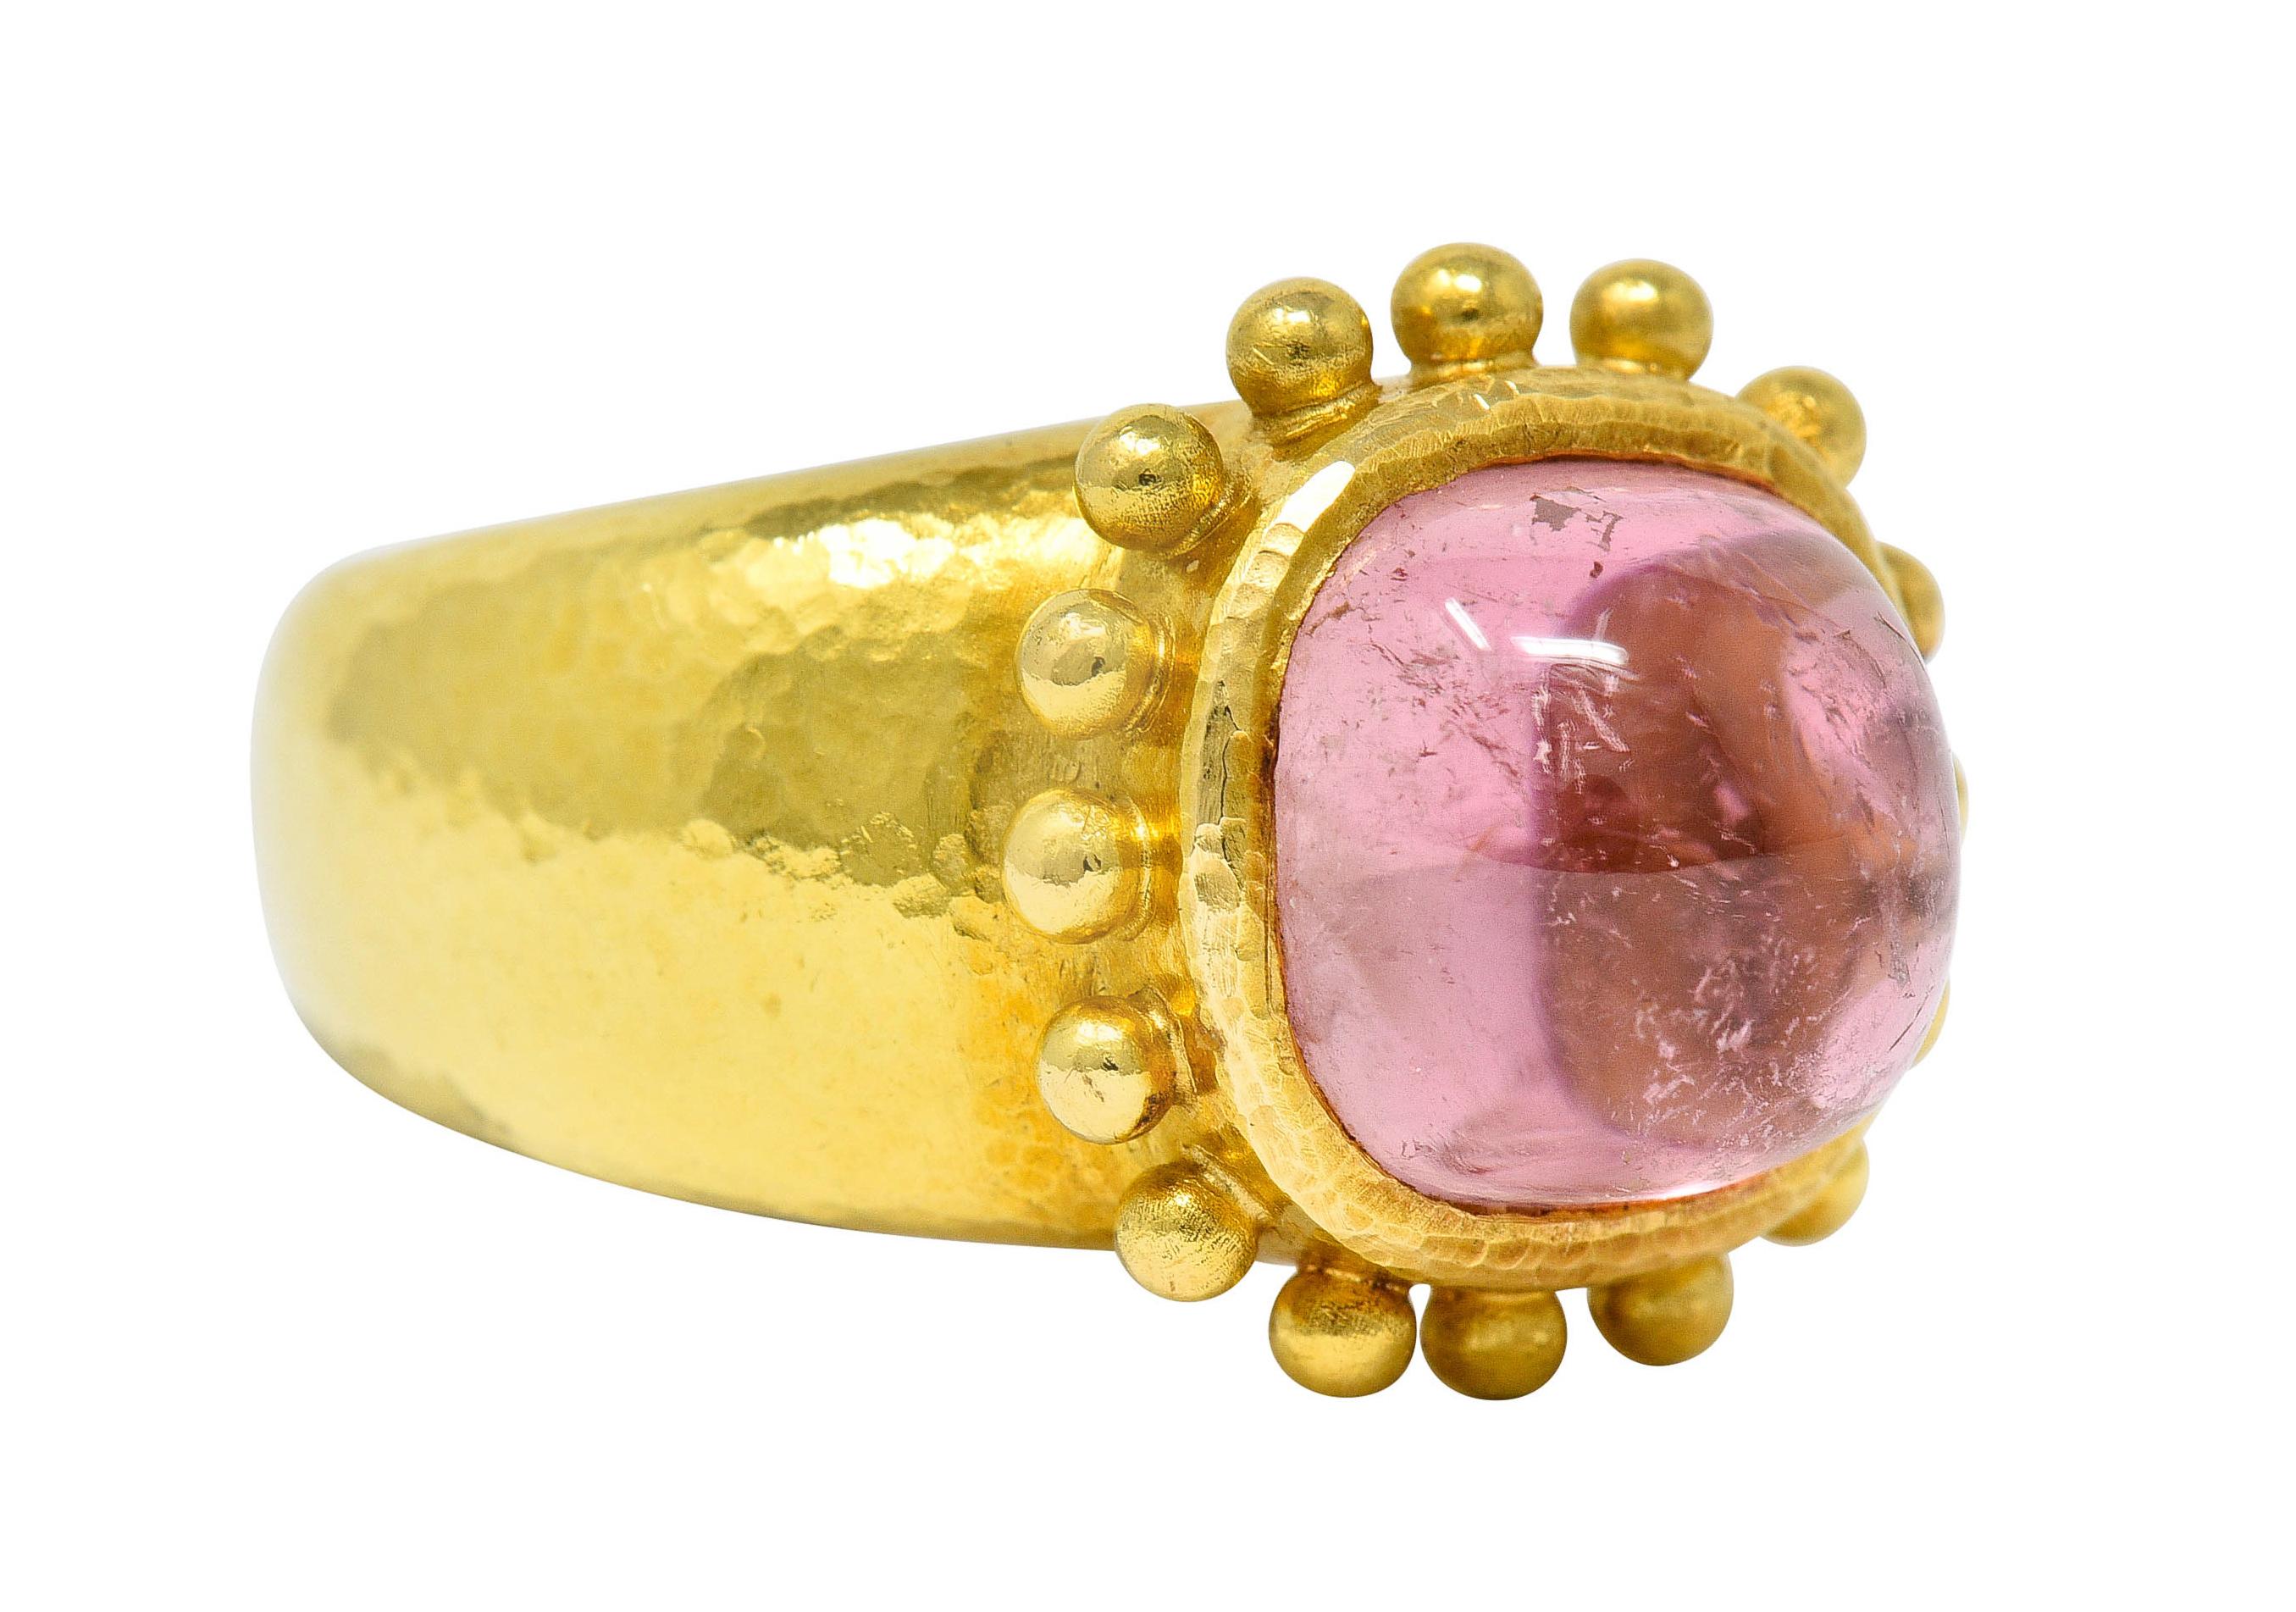 Centering a sugarloaf cabochon of pink tourmaline that measures 10.0 x 10.0

Semi-transparent and medium light pink with natural inclusions and moderate chatoyancy

Bezel set and with a prominent gold bead halo and a subtle hammered finish

Stamped